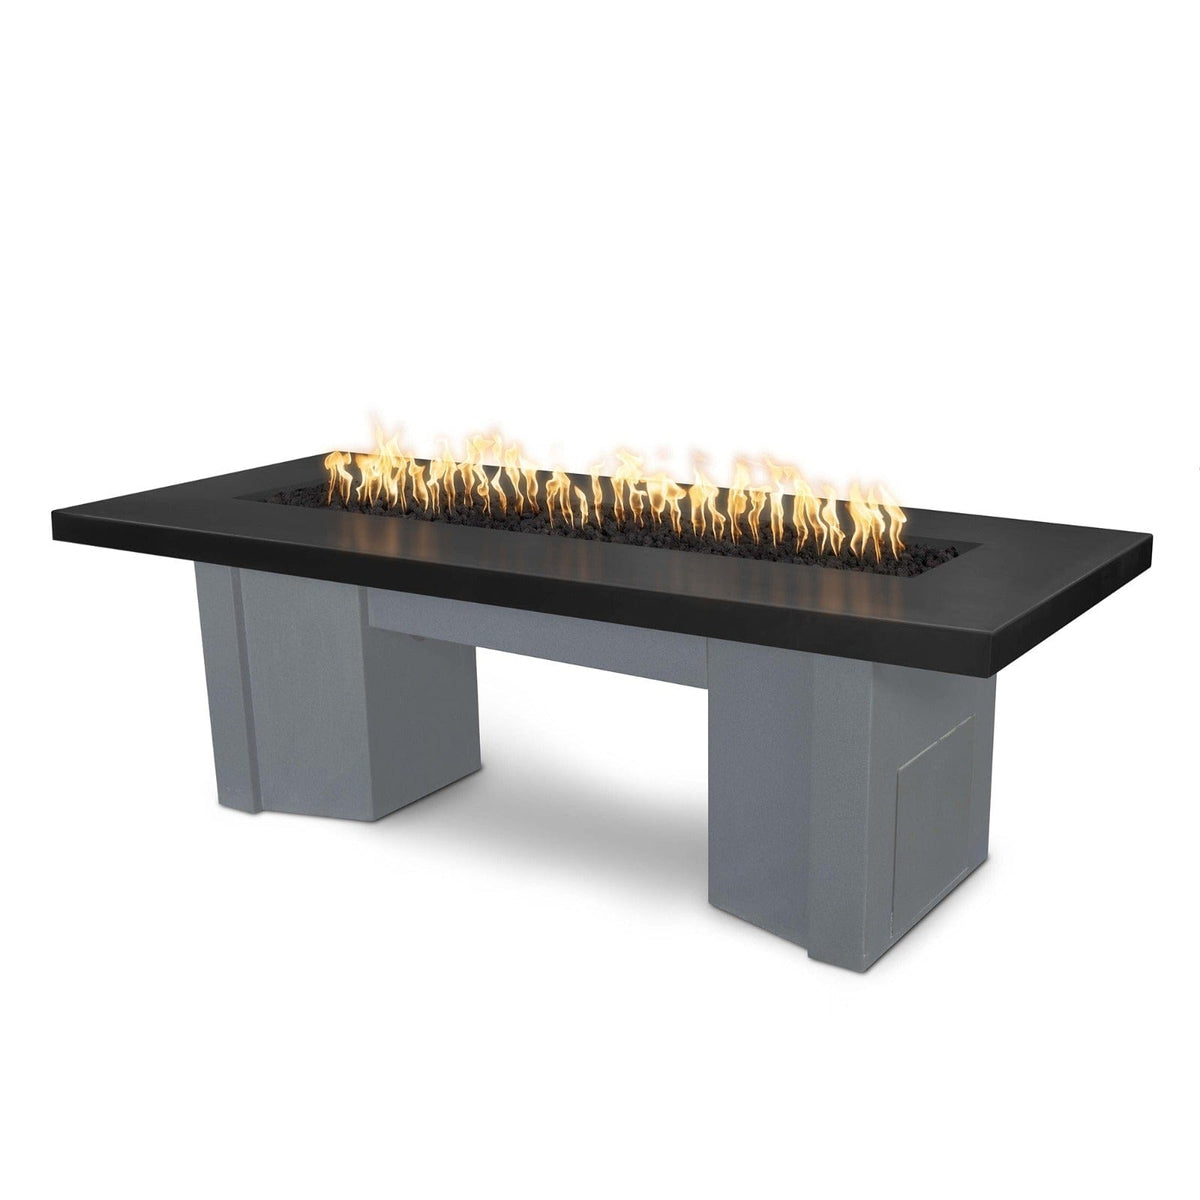 The Outdoor Plus Fire Features Black (-BLK) / Gray Powder Coated Steel (-GRY) The Outdoor Plus 60&quot; Alameda Fire Table Smooth Concrete in Natural Gas - Flame Sense System with Push Button Spark Igniter / OPT-ALMGFRC60FSEN-NG